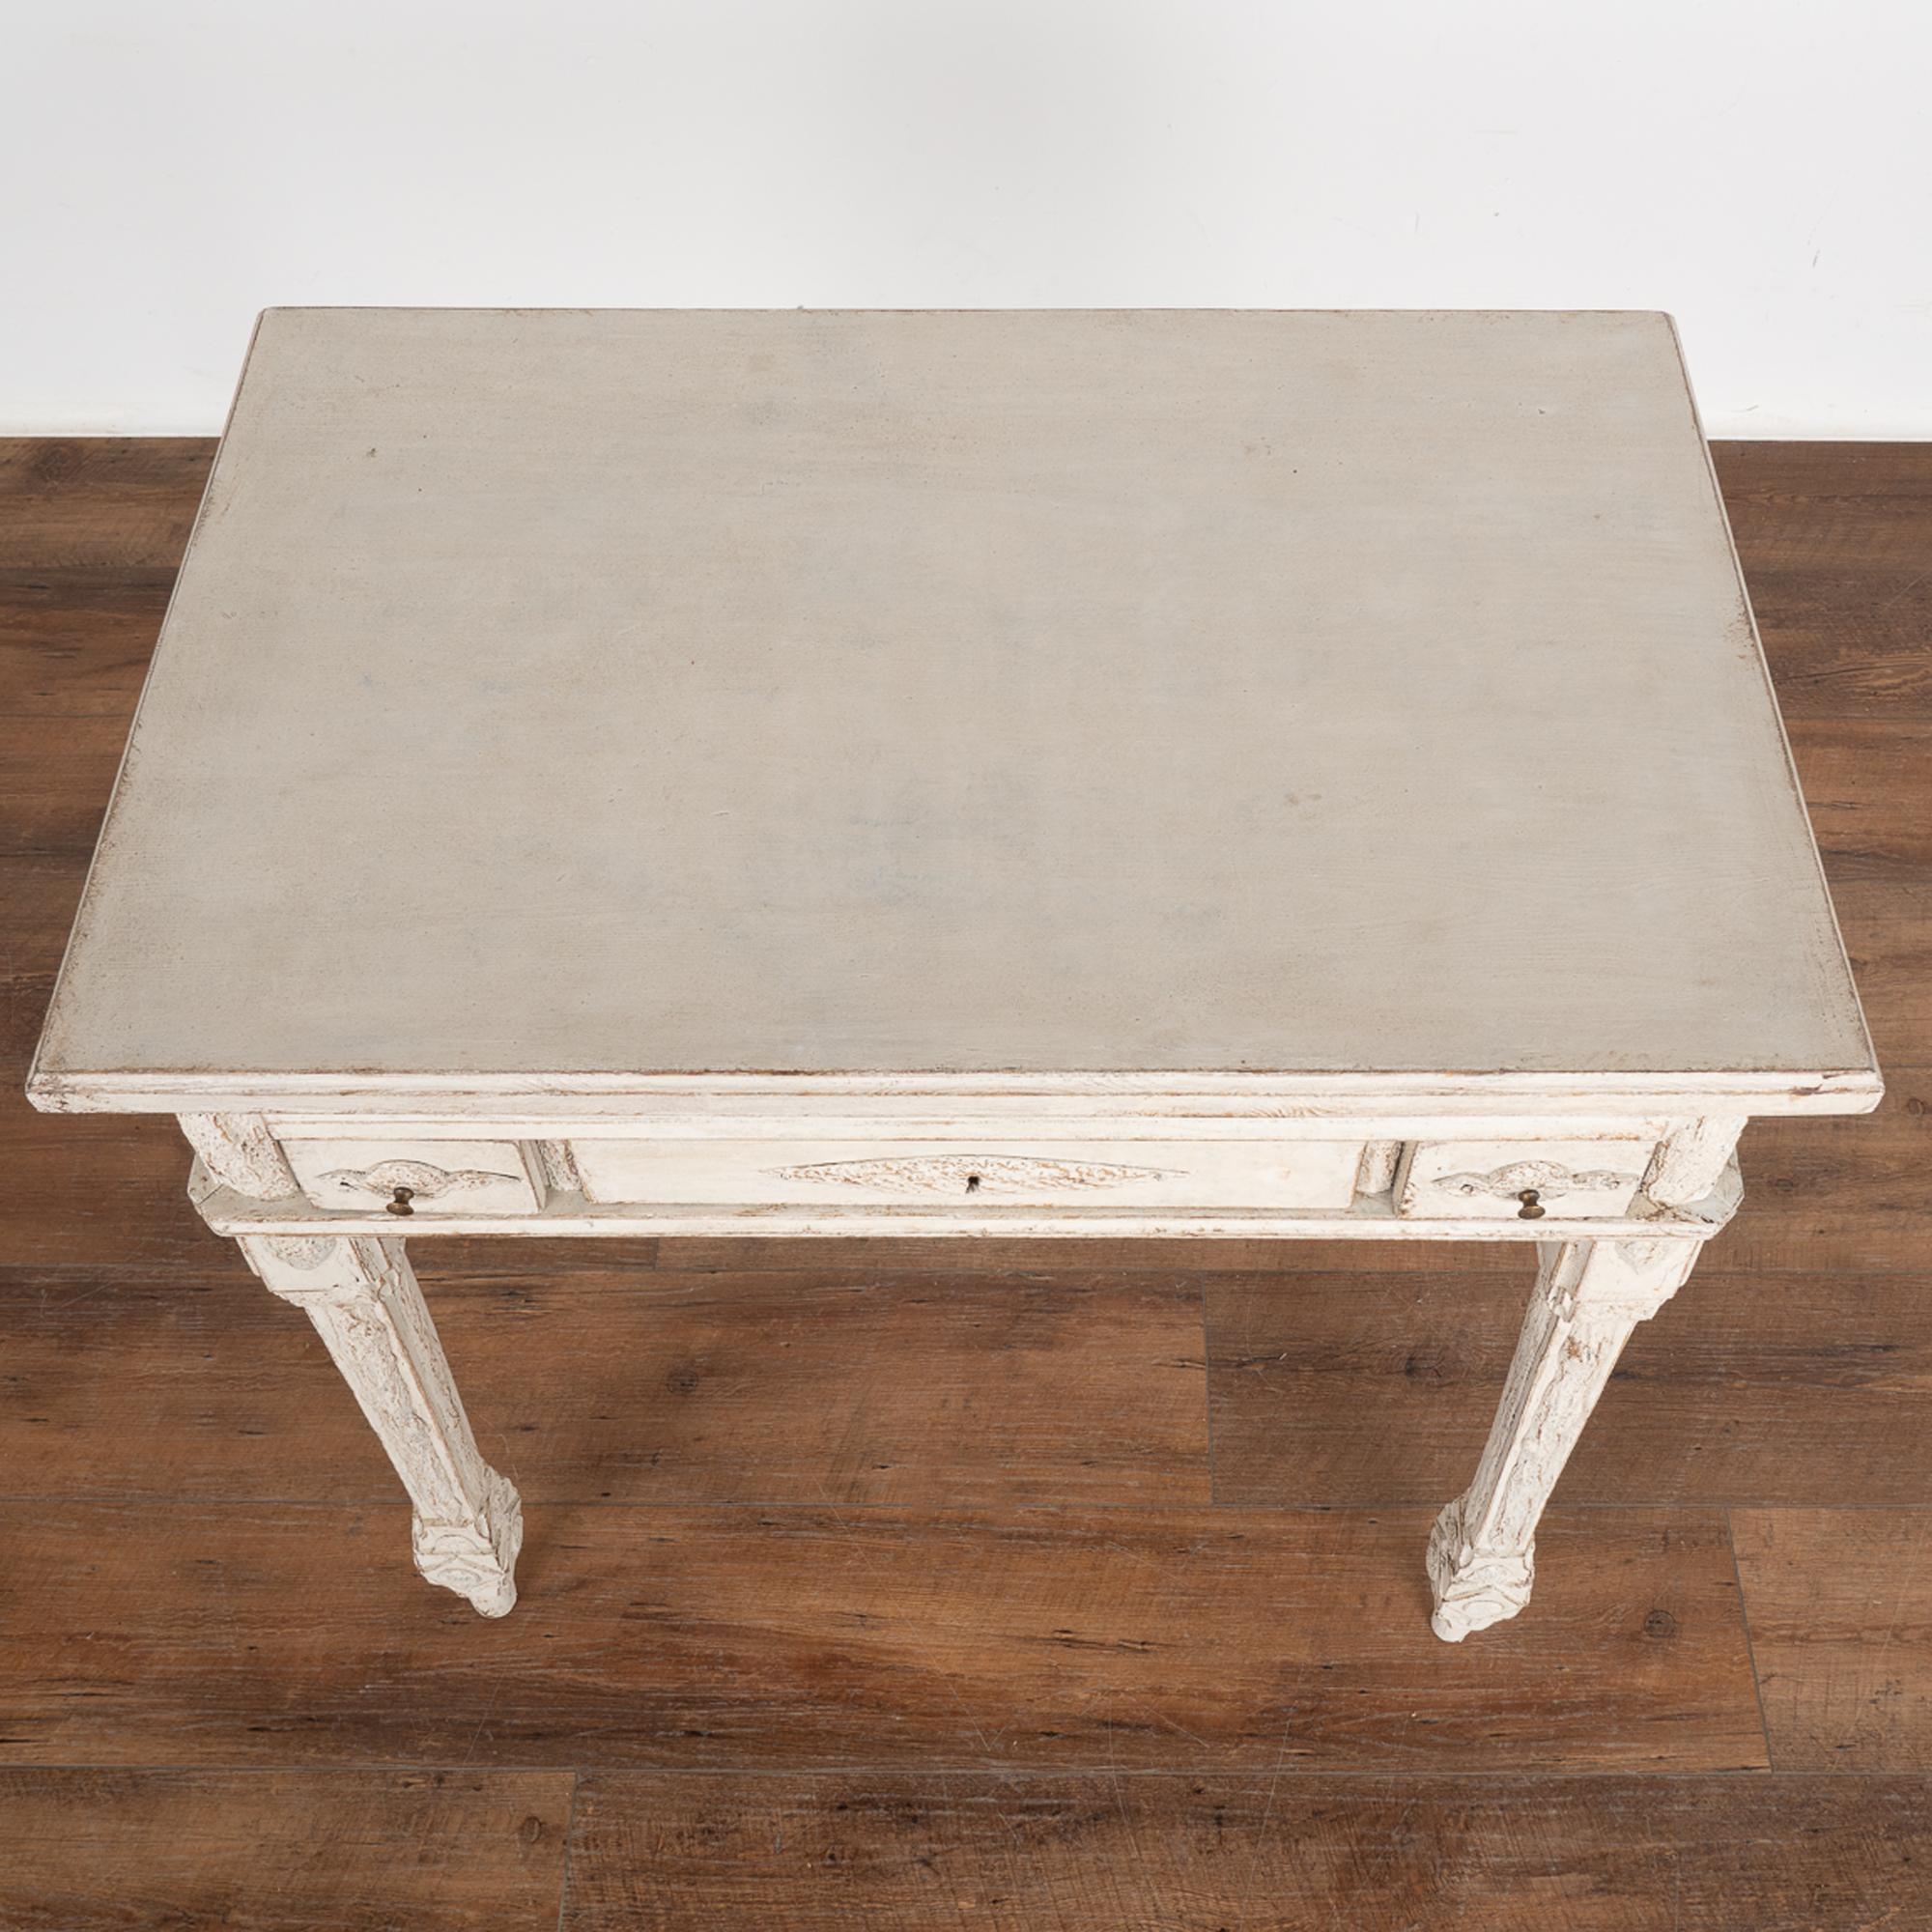 White Painted Small Side Table With Three Drawers, Sweden circa 1890 In Good Condition For Sale In Round Top, TX